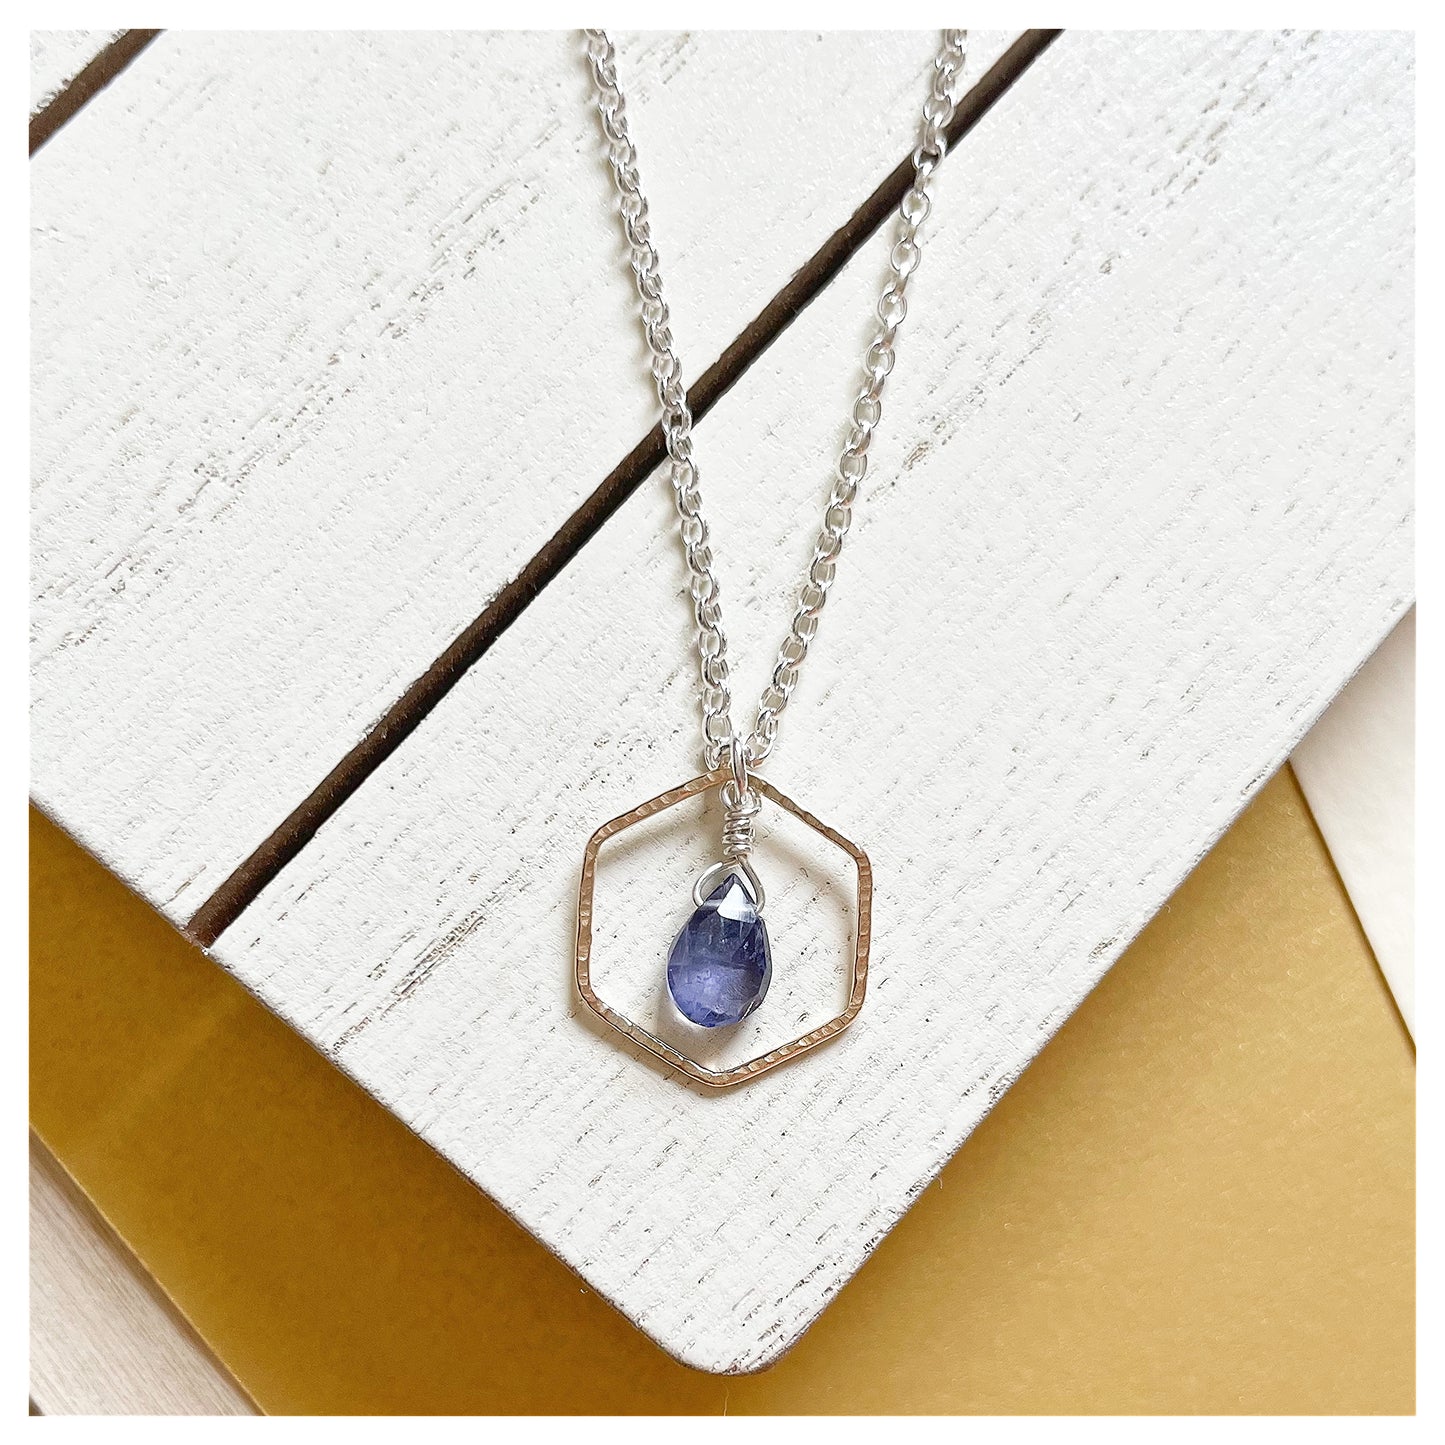 Mini 9ct Yellow Gold Hammered Hexagon, Sterling Silver and Iolite Briolette Necklace